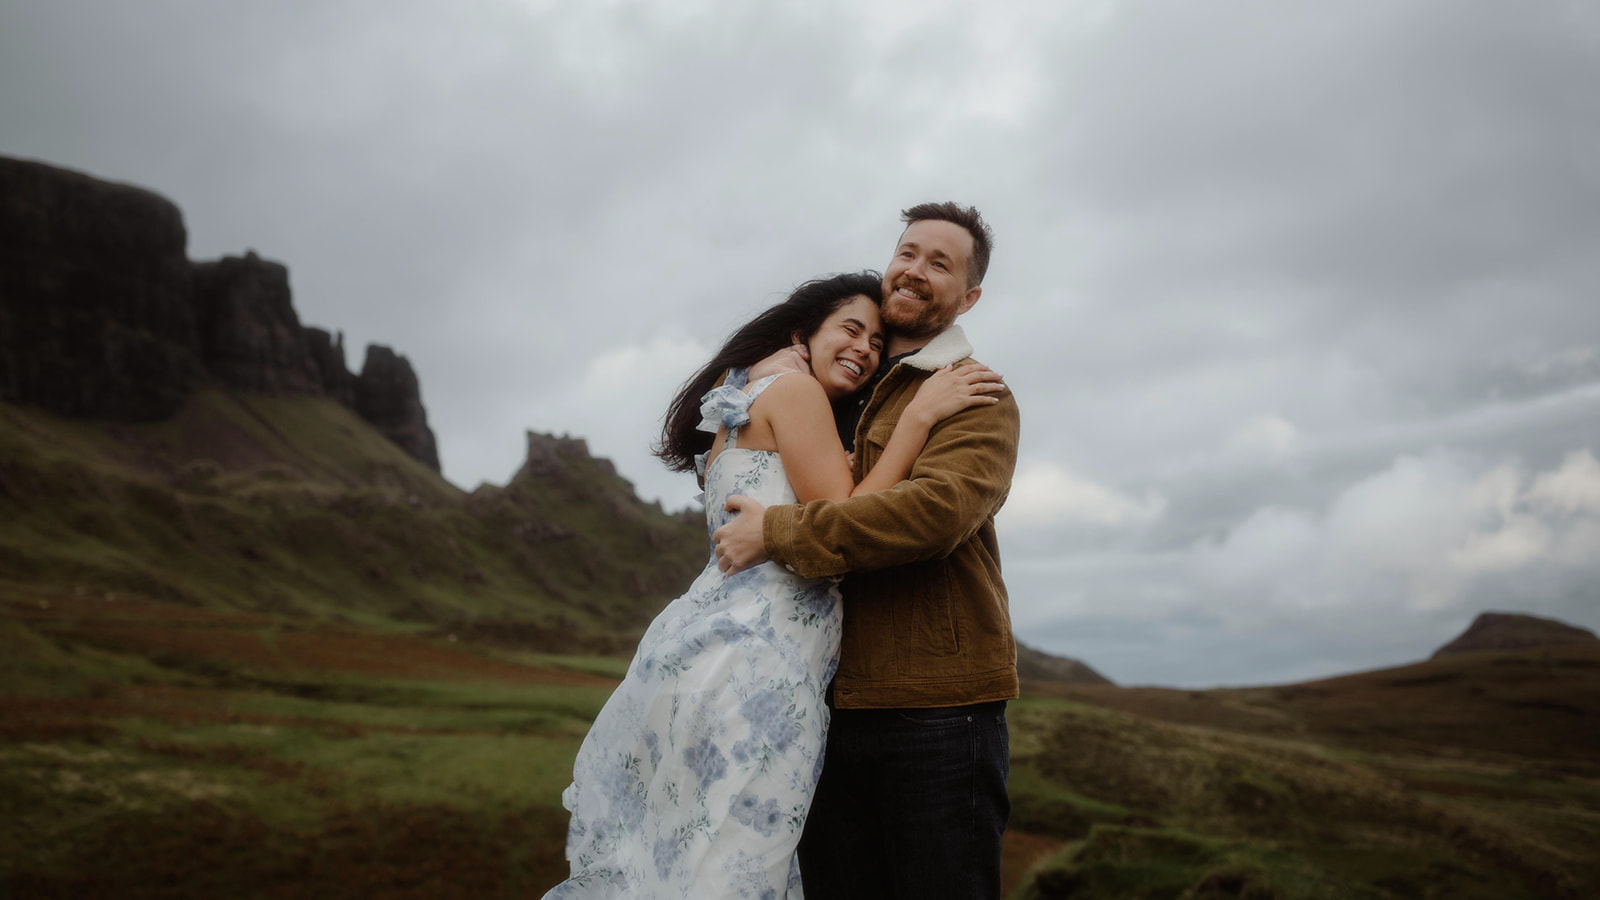 Alex and Elliot shared a romantic moment during their Isle of Skye adventure last September.